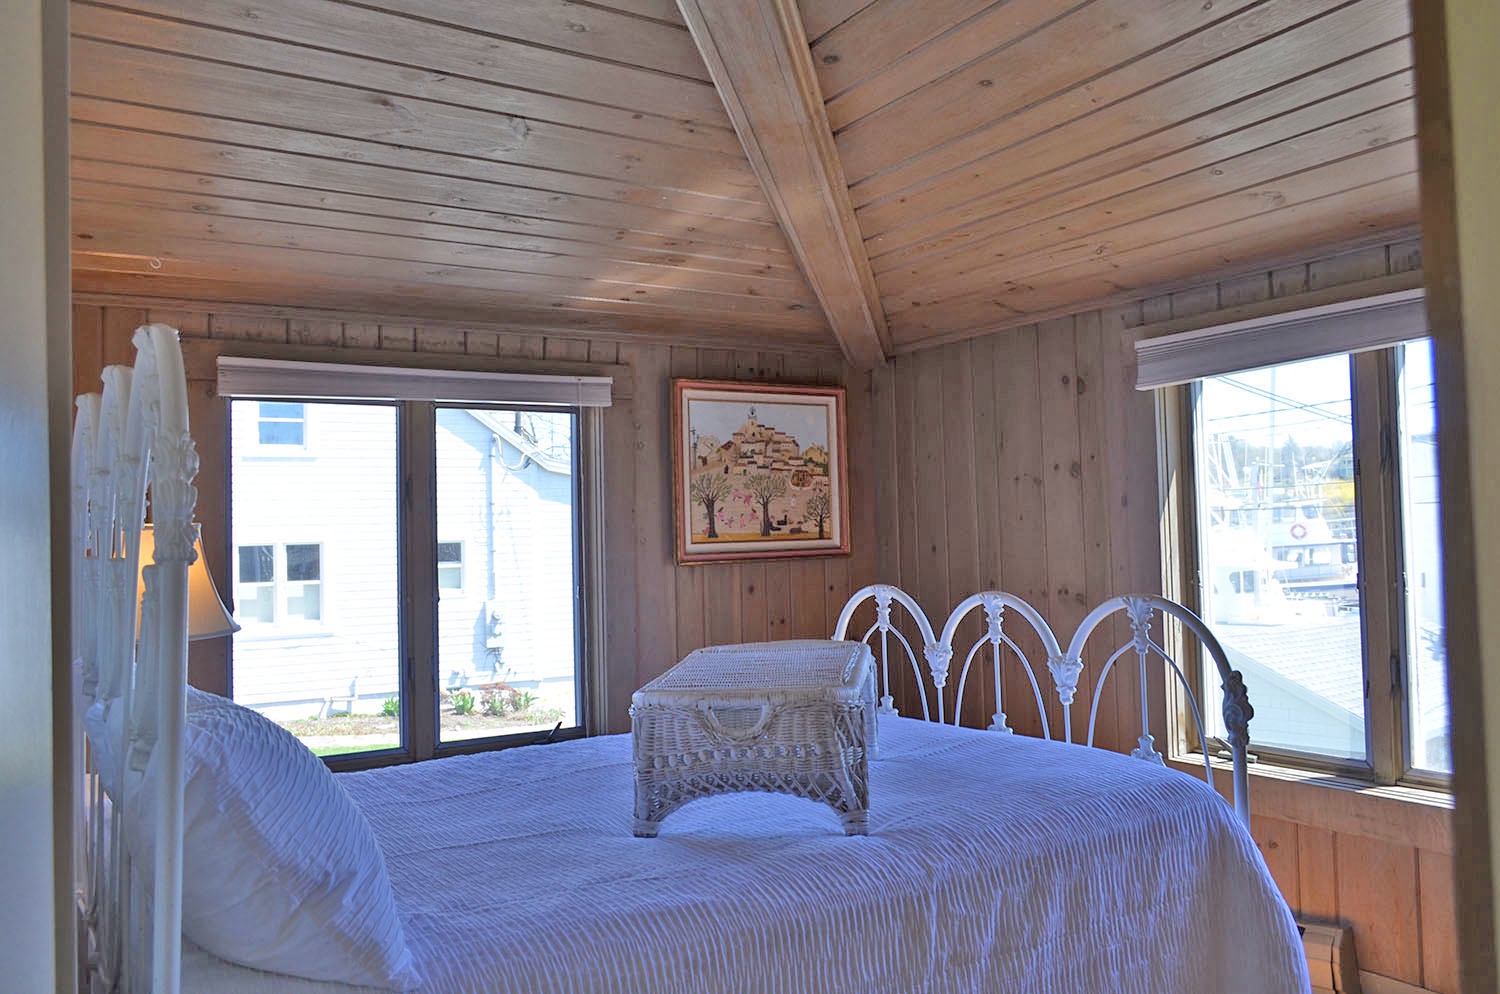 Bedroom 2: This bedroom has a Queen bed and views of Smith Cove.